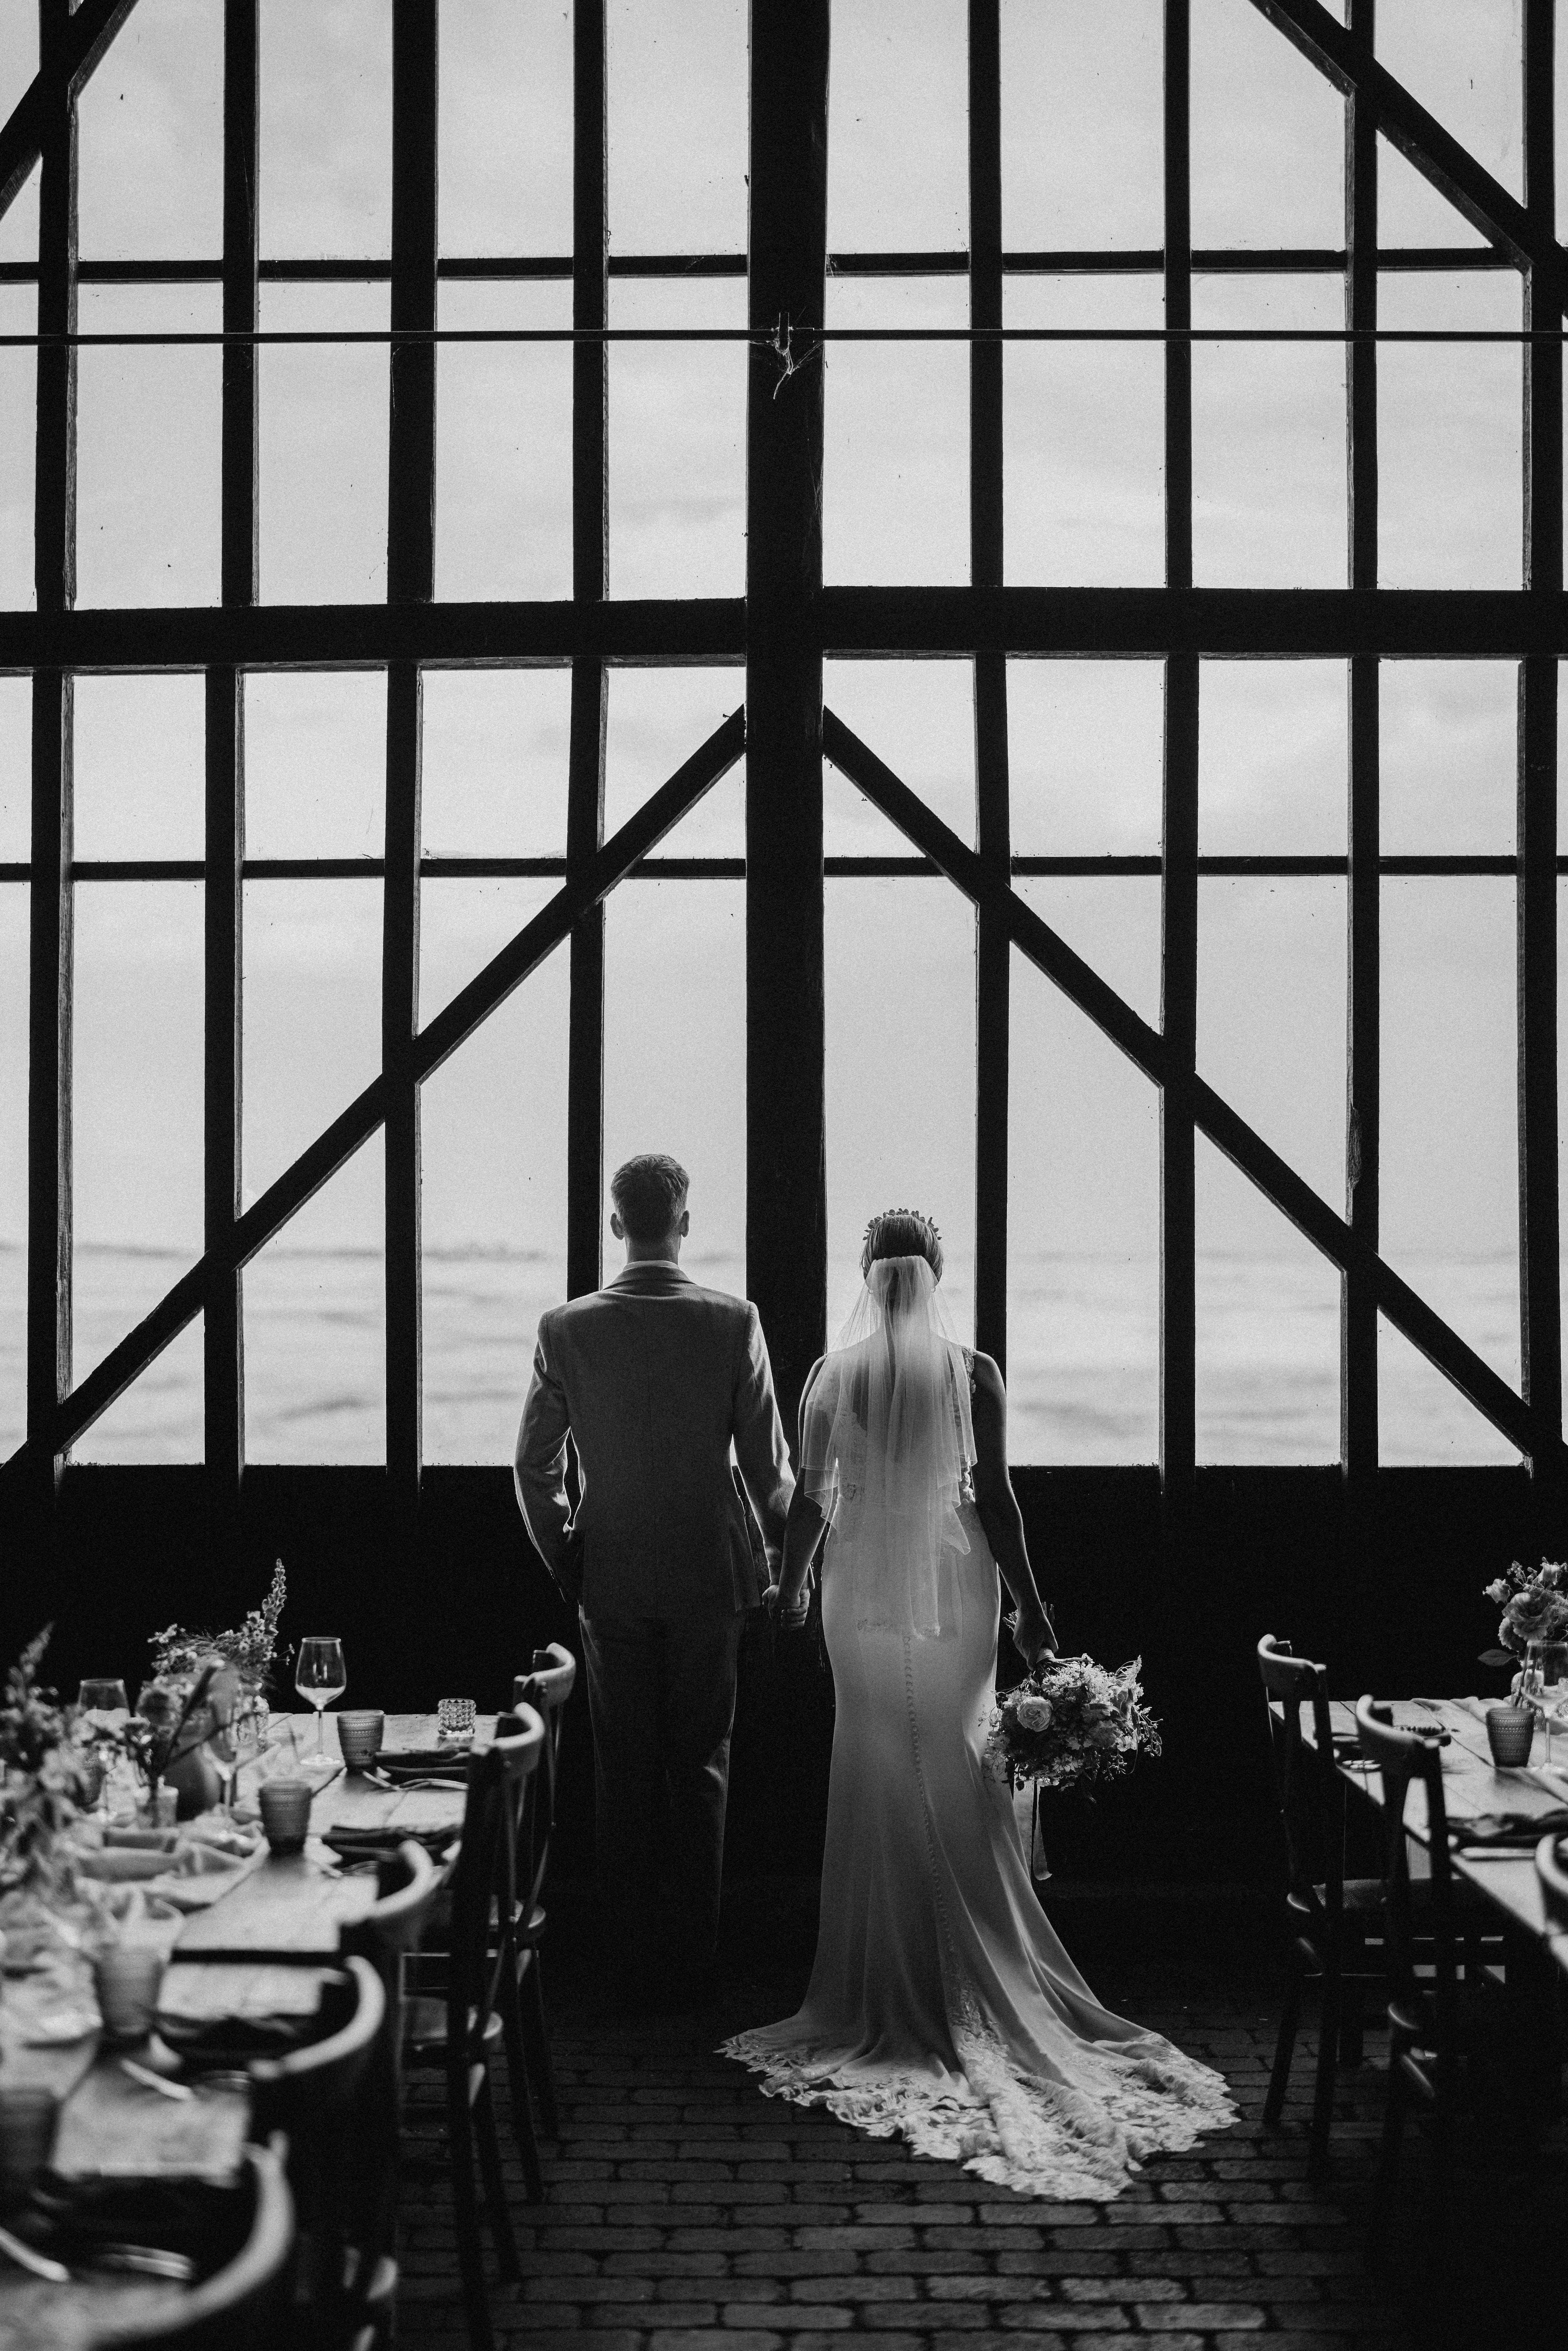 A bride and groom, hand-in-hand, looking out of the large glass window in the Elmley Nature Reserve barn. The photo is striking in black and white